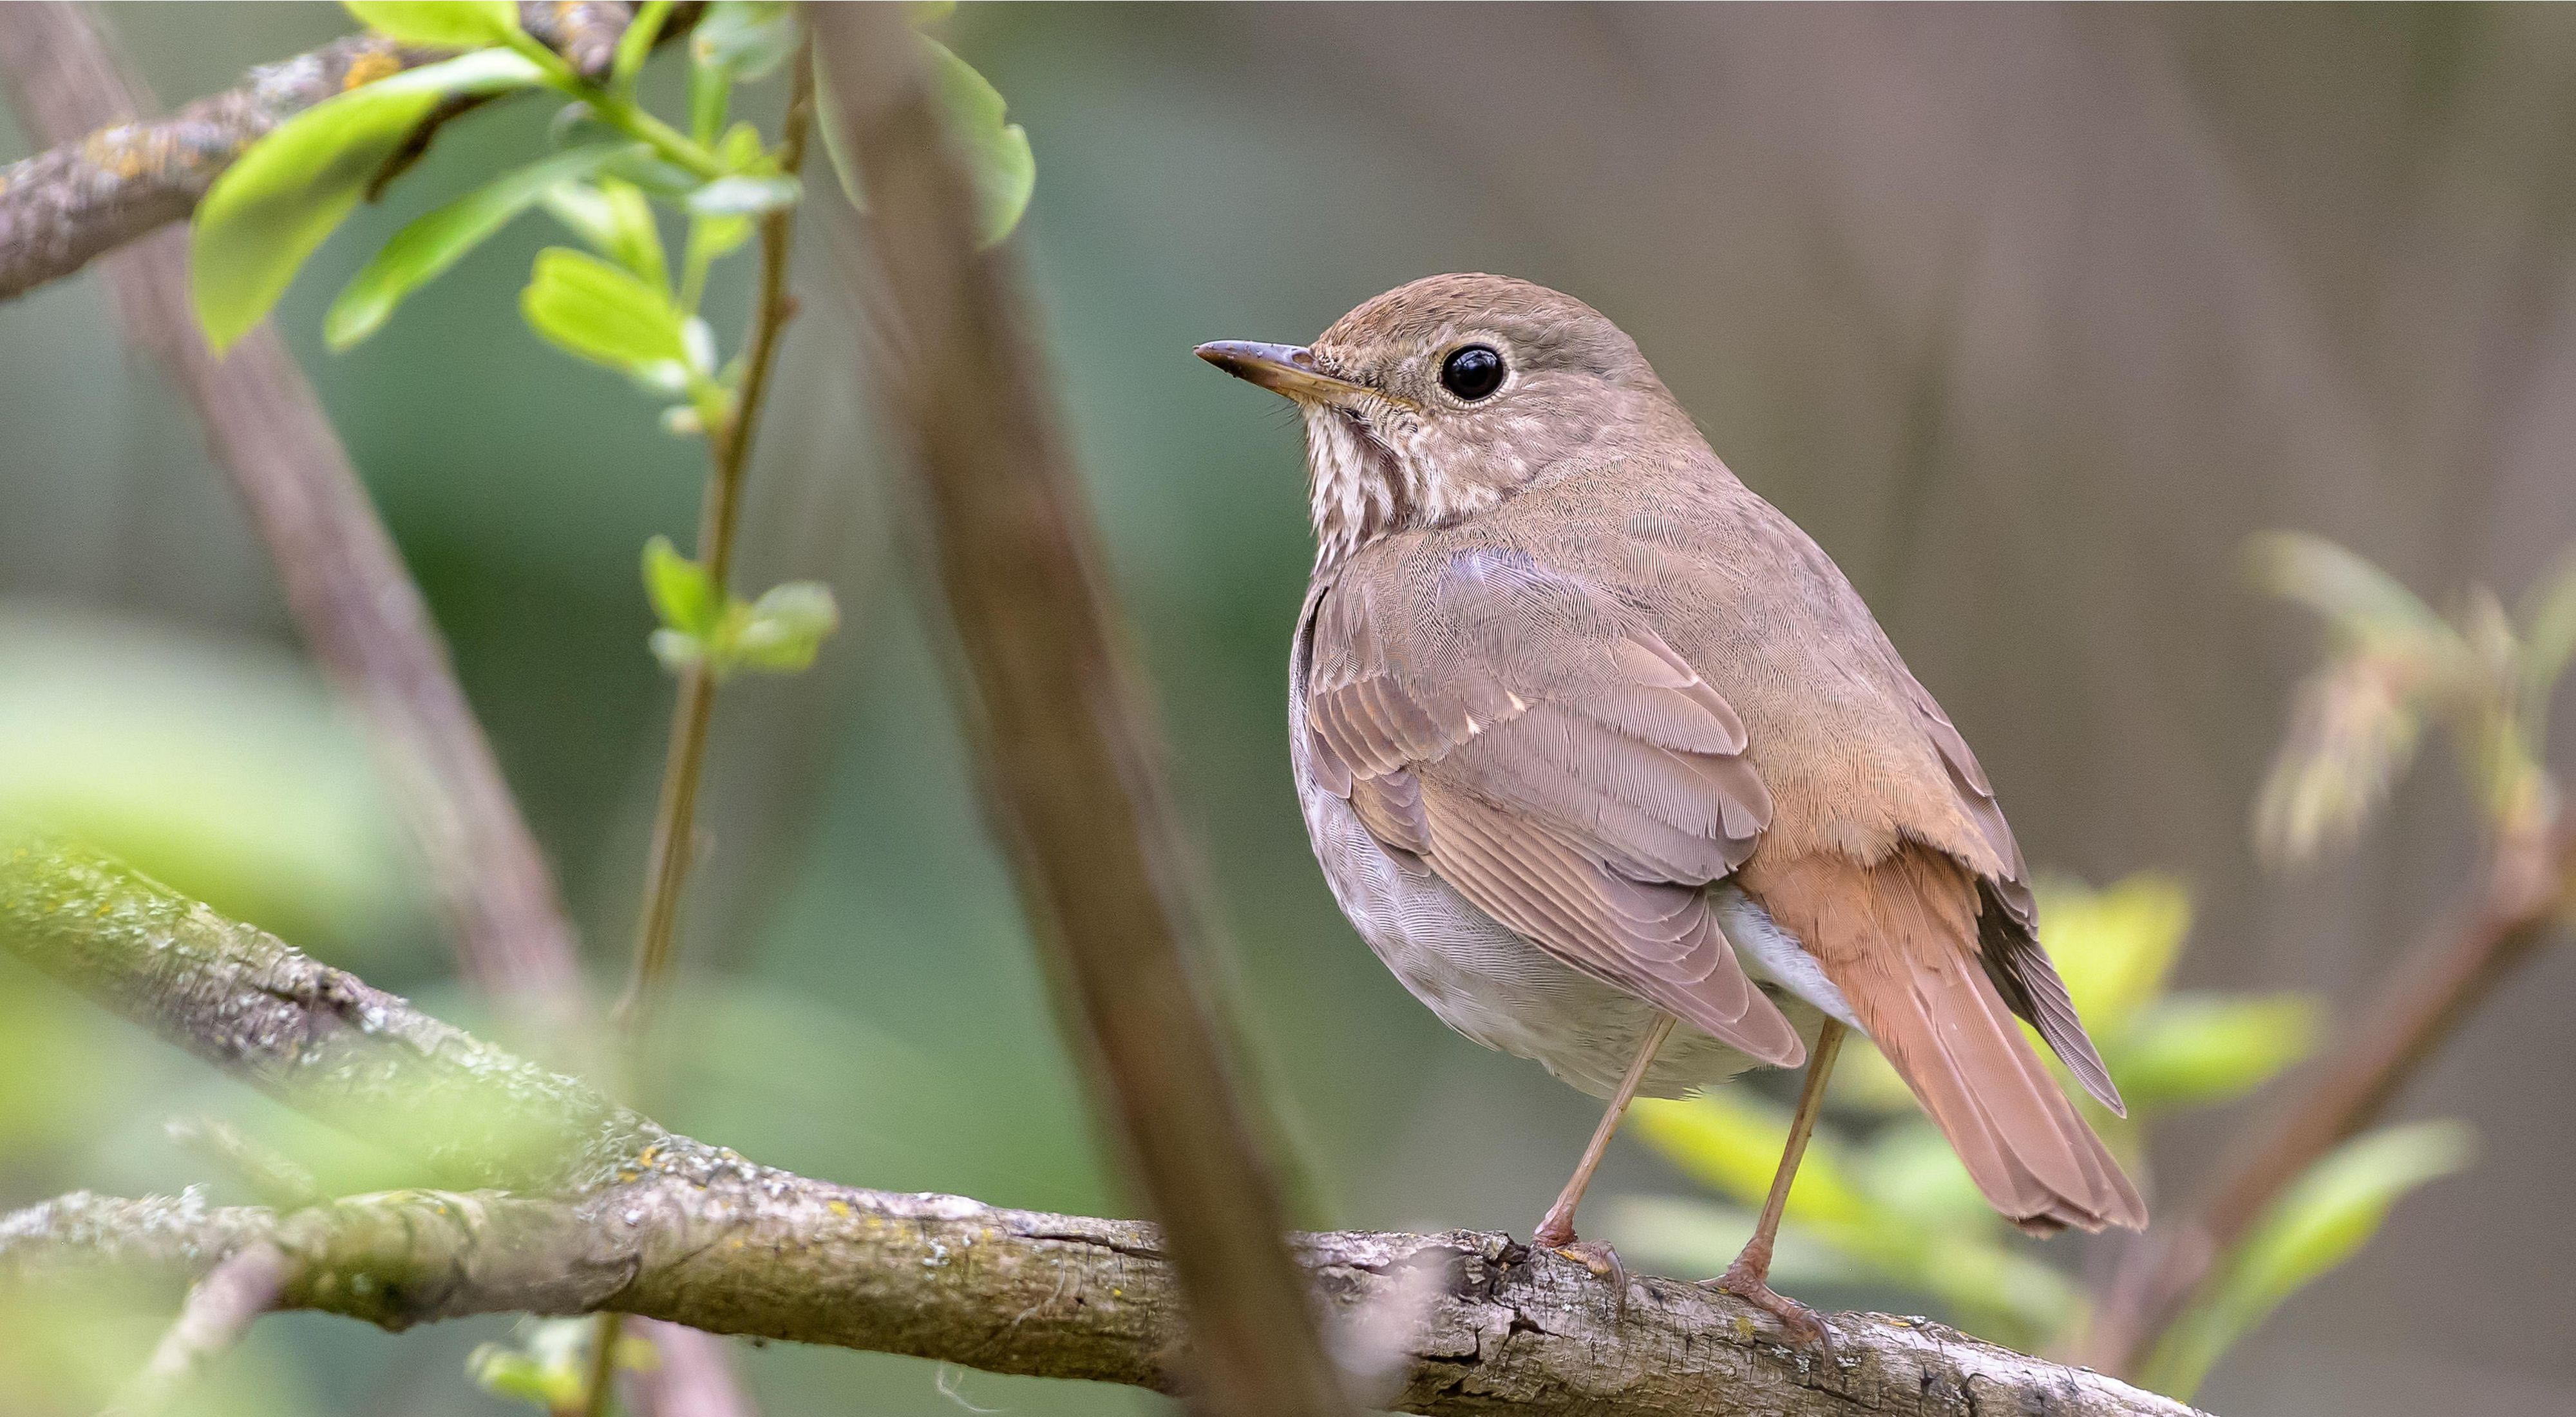 Closeup of a brown hermit thrush perched on a branch.